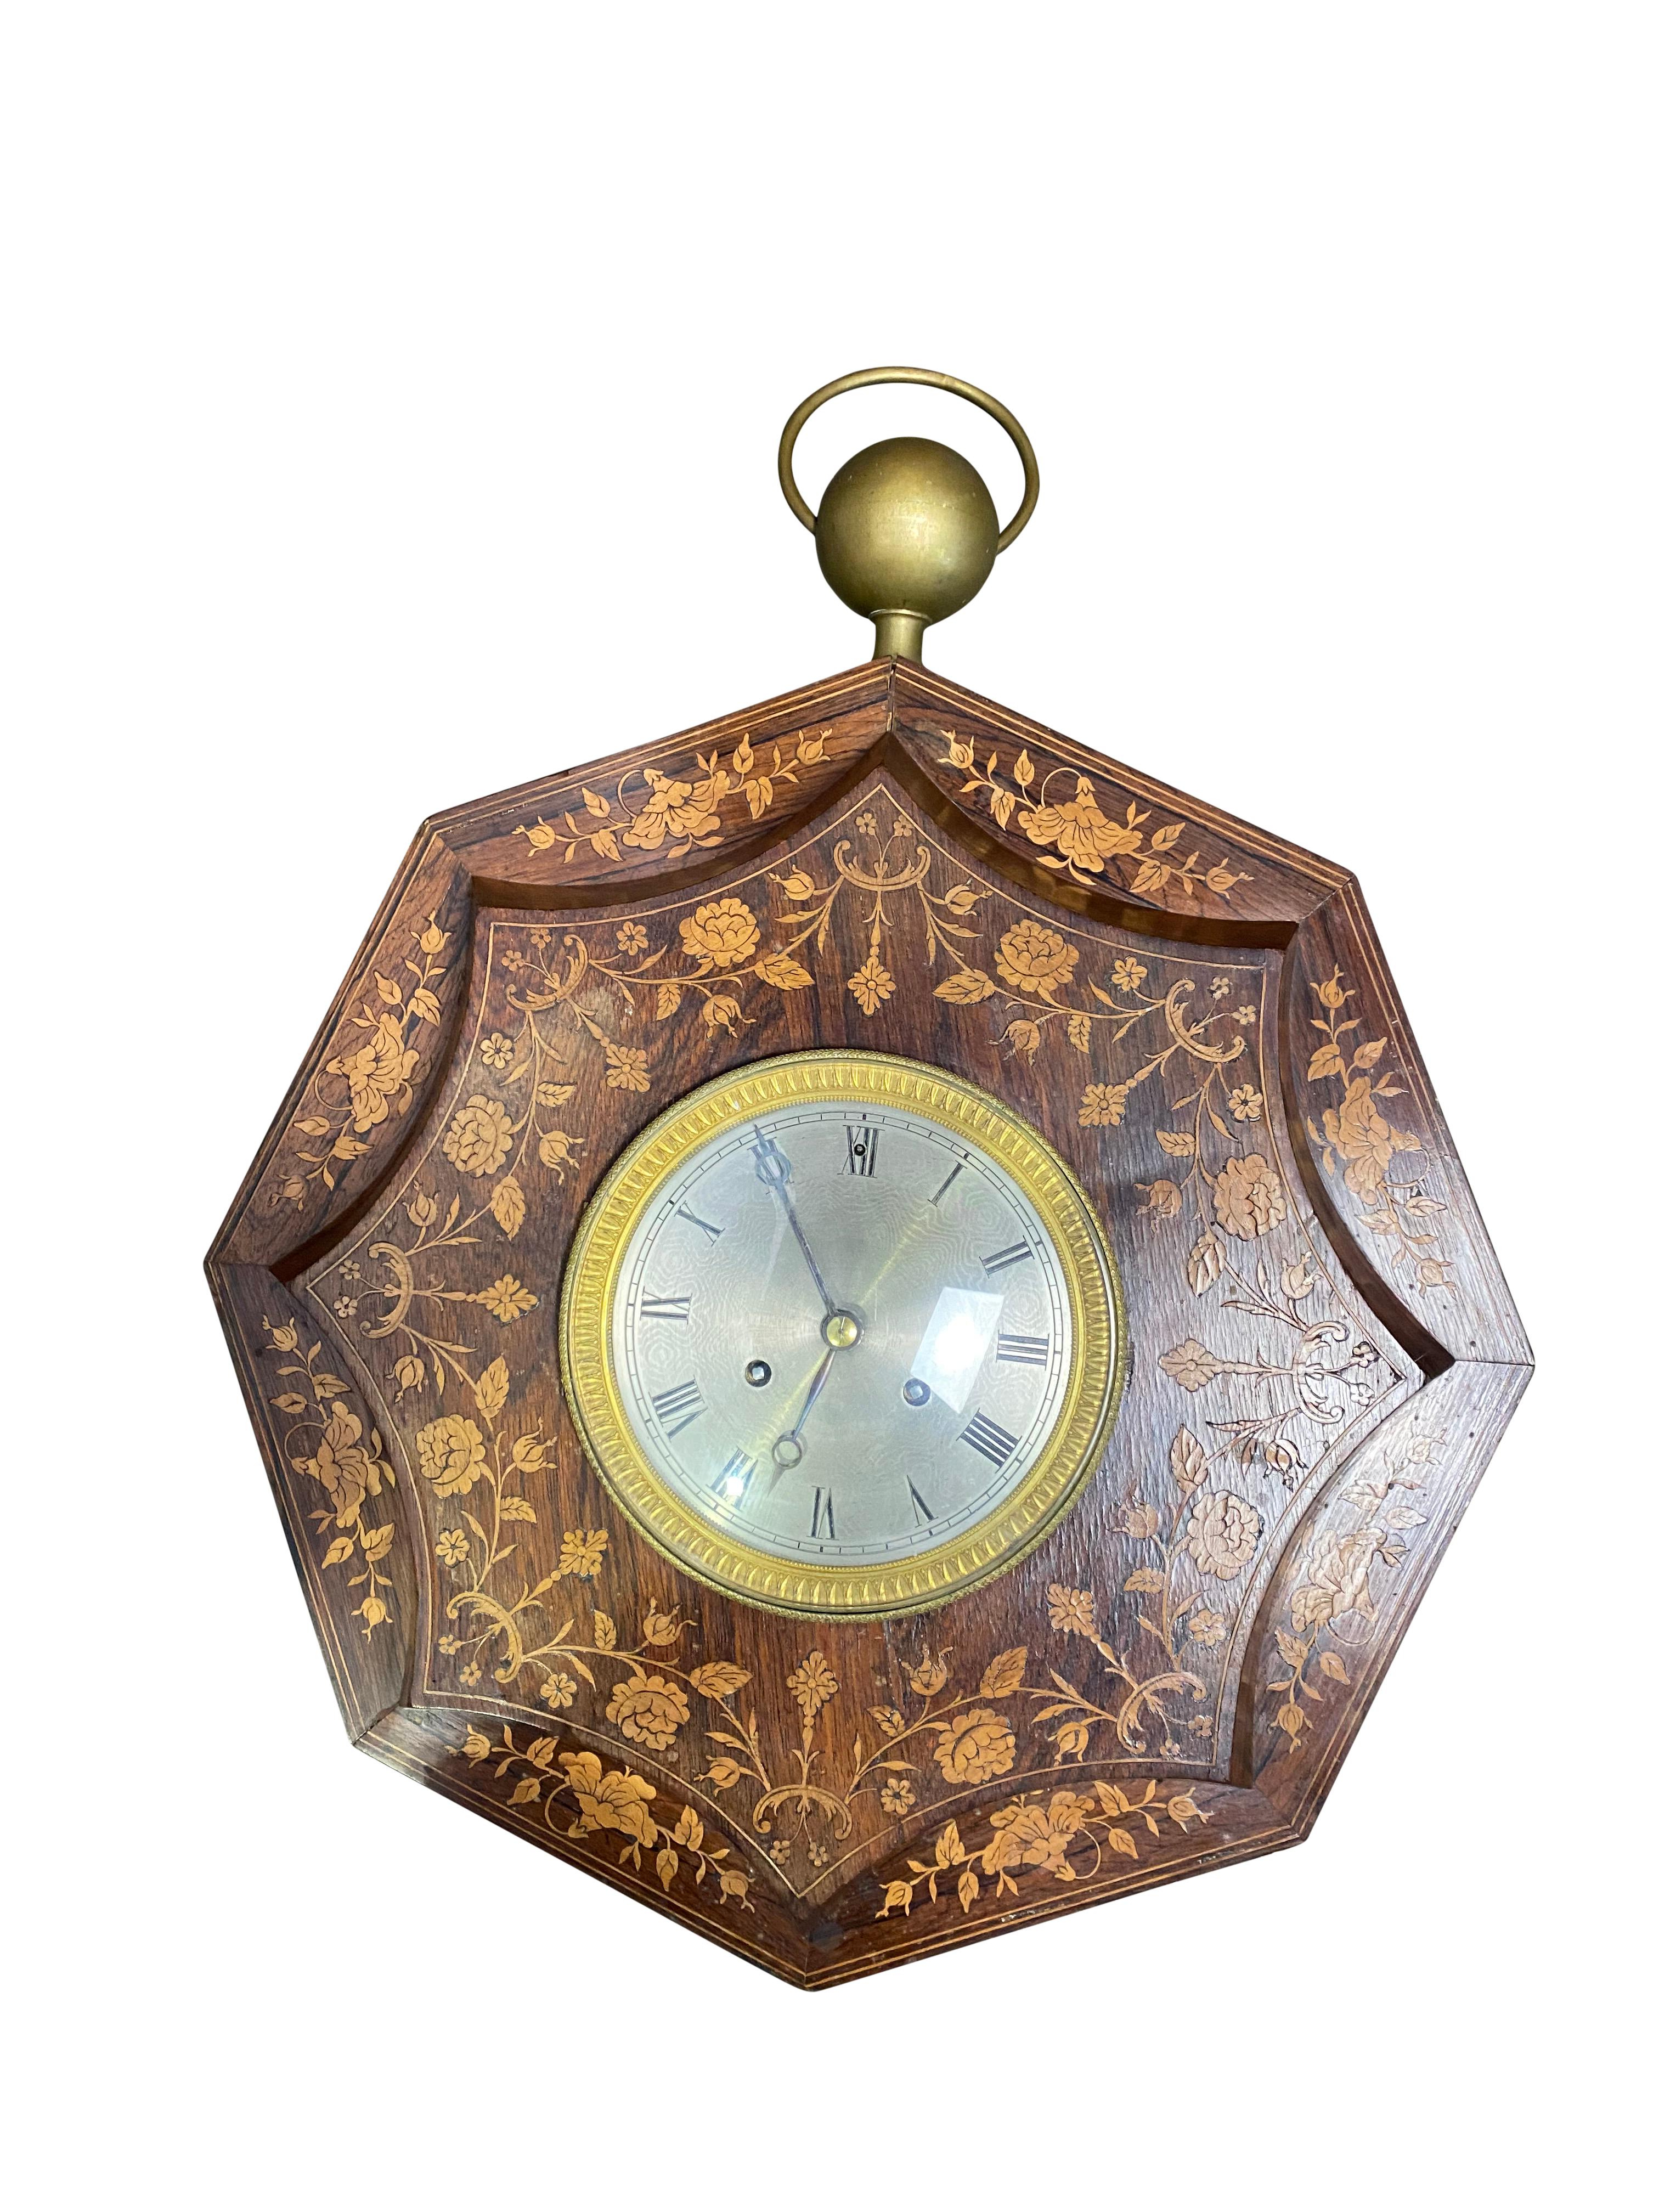 A French rosewood and boxwood cased wall clock, second quarter of the 19th century. The 6